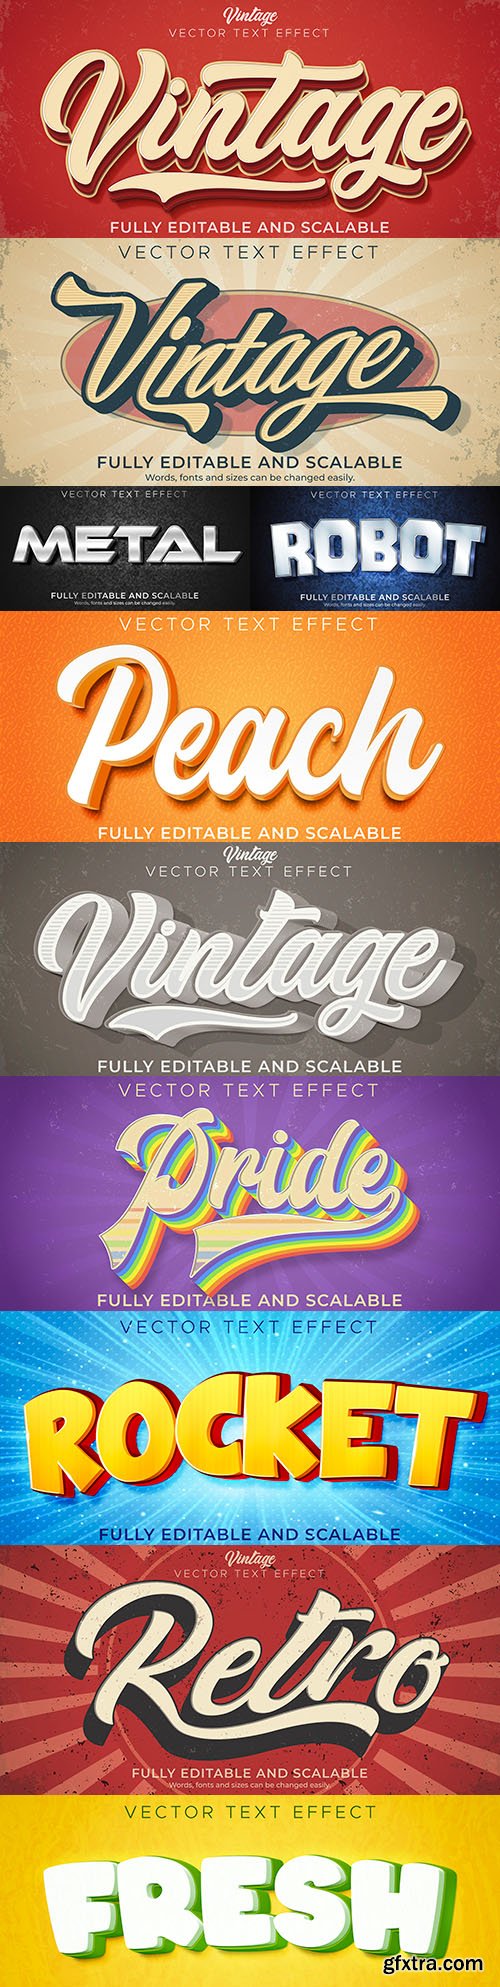 Editable font and 3d effect text design collection illustration 31